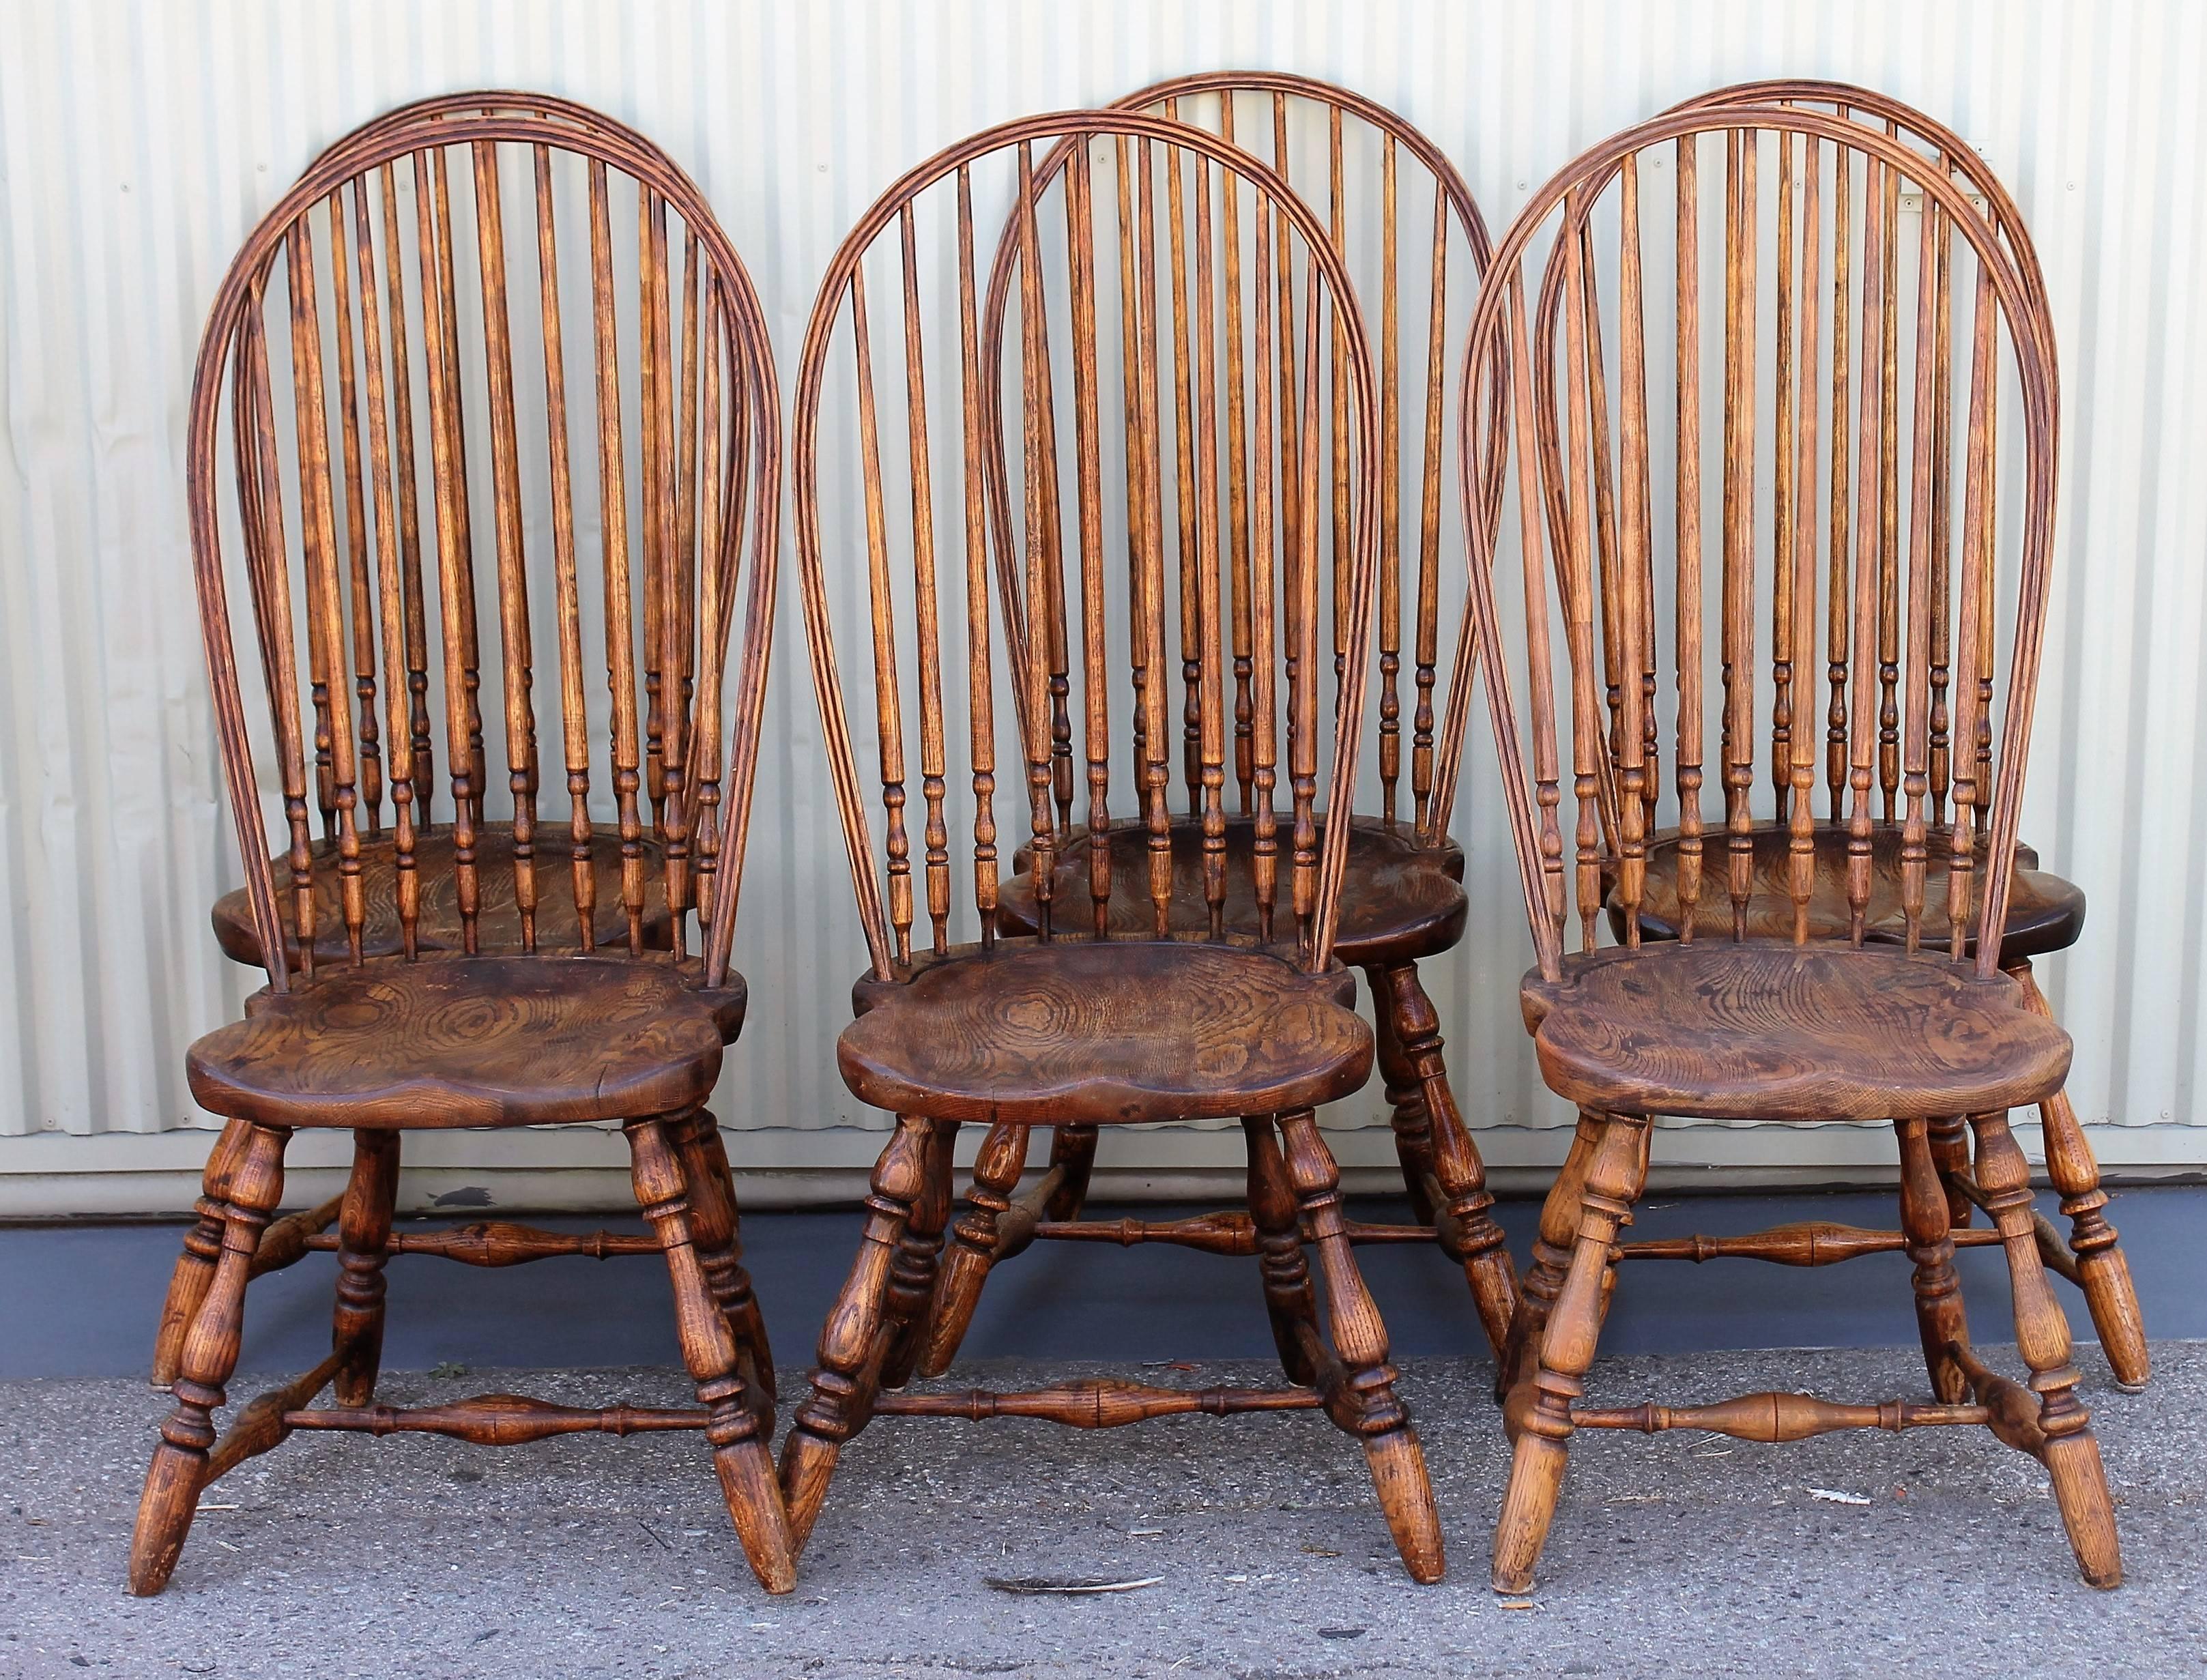 These chairs are from the early 20th century and are fine handcrafted hoop back Windsor chairs. They are made of hickory and oak and are all mortised and pegged. The spindles are mortised through as well as the legs through the saddle seats. These